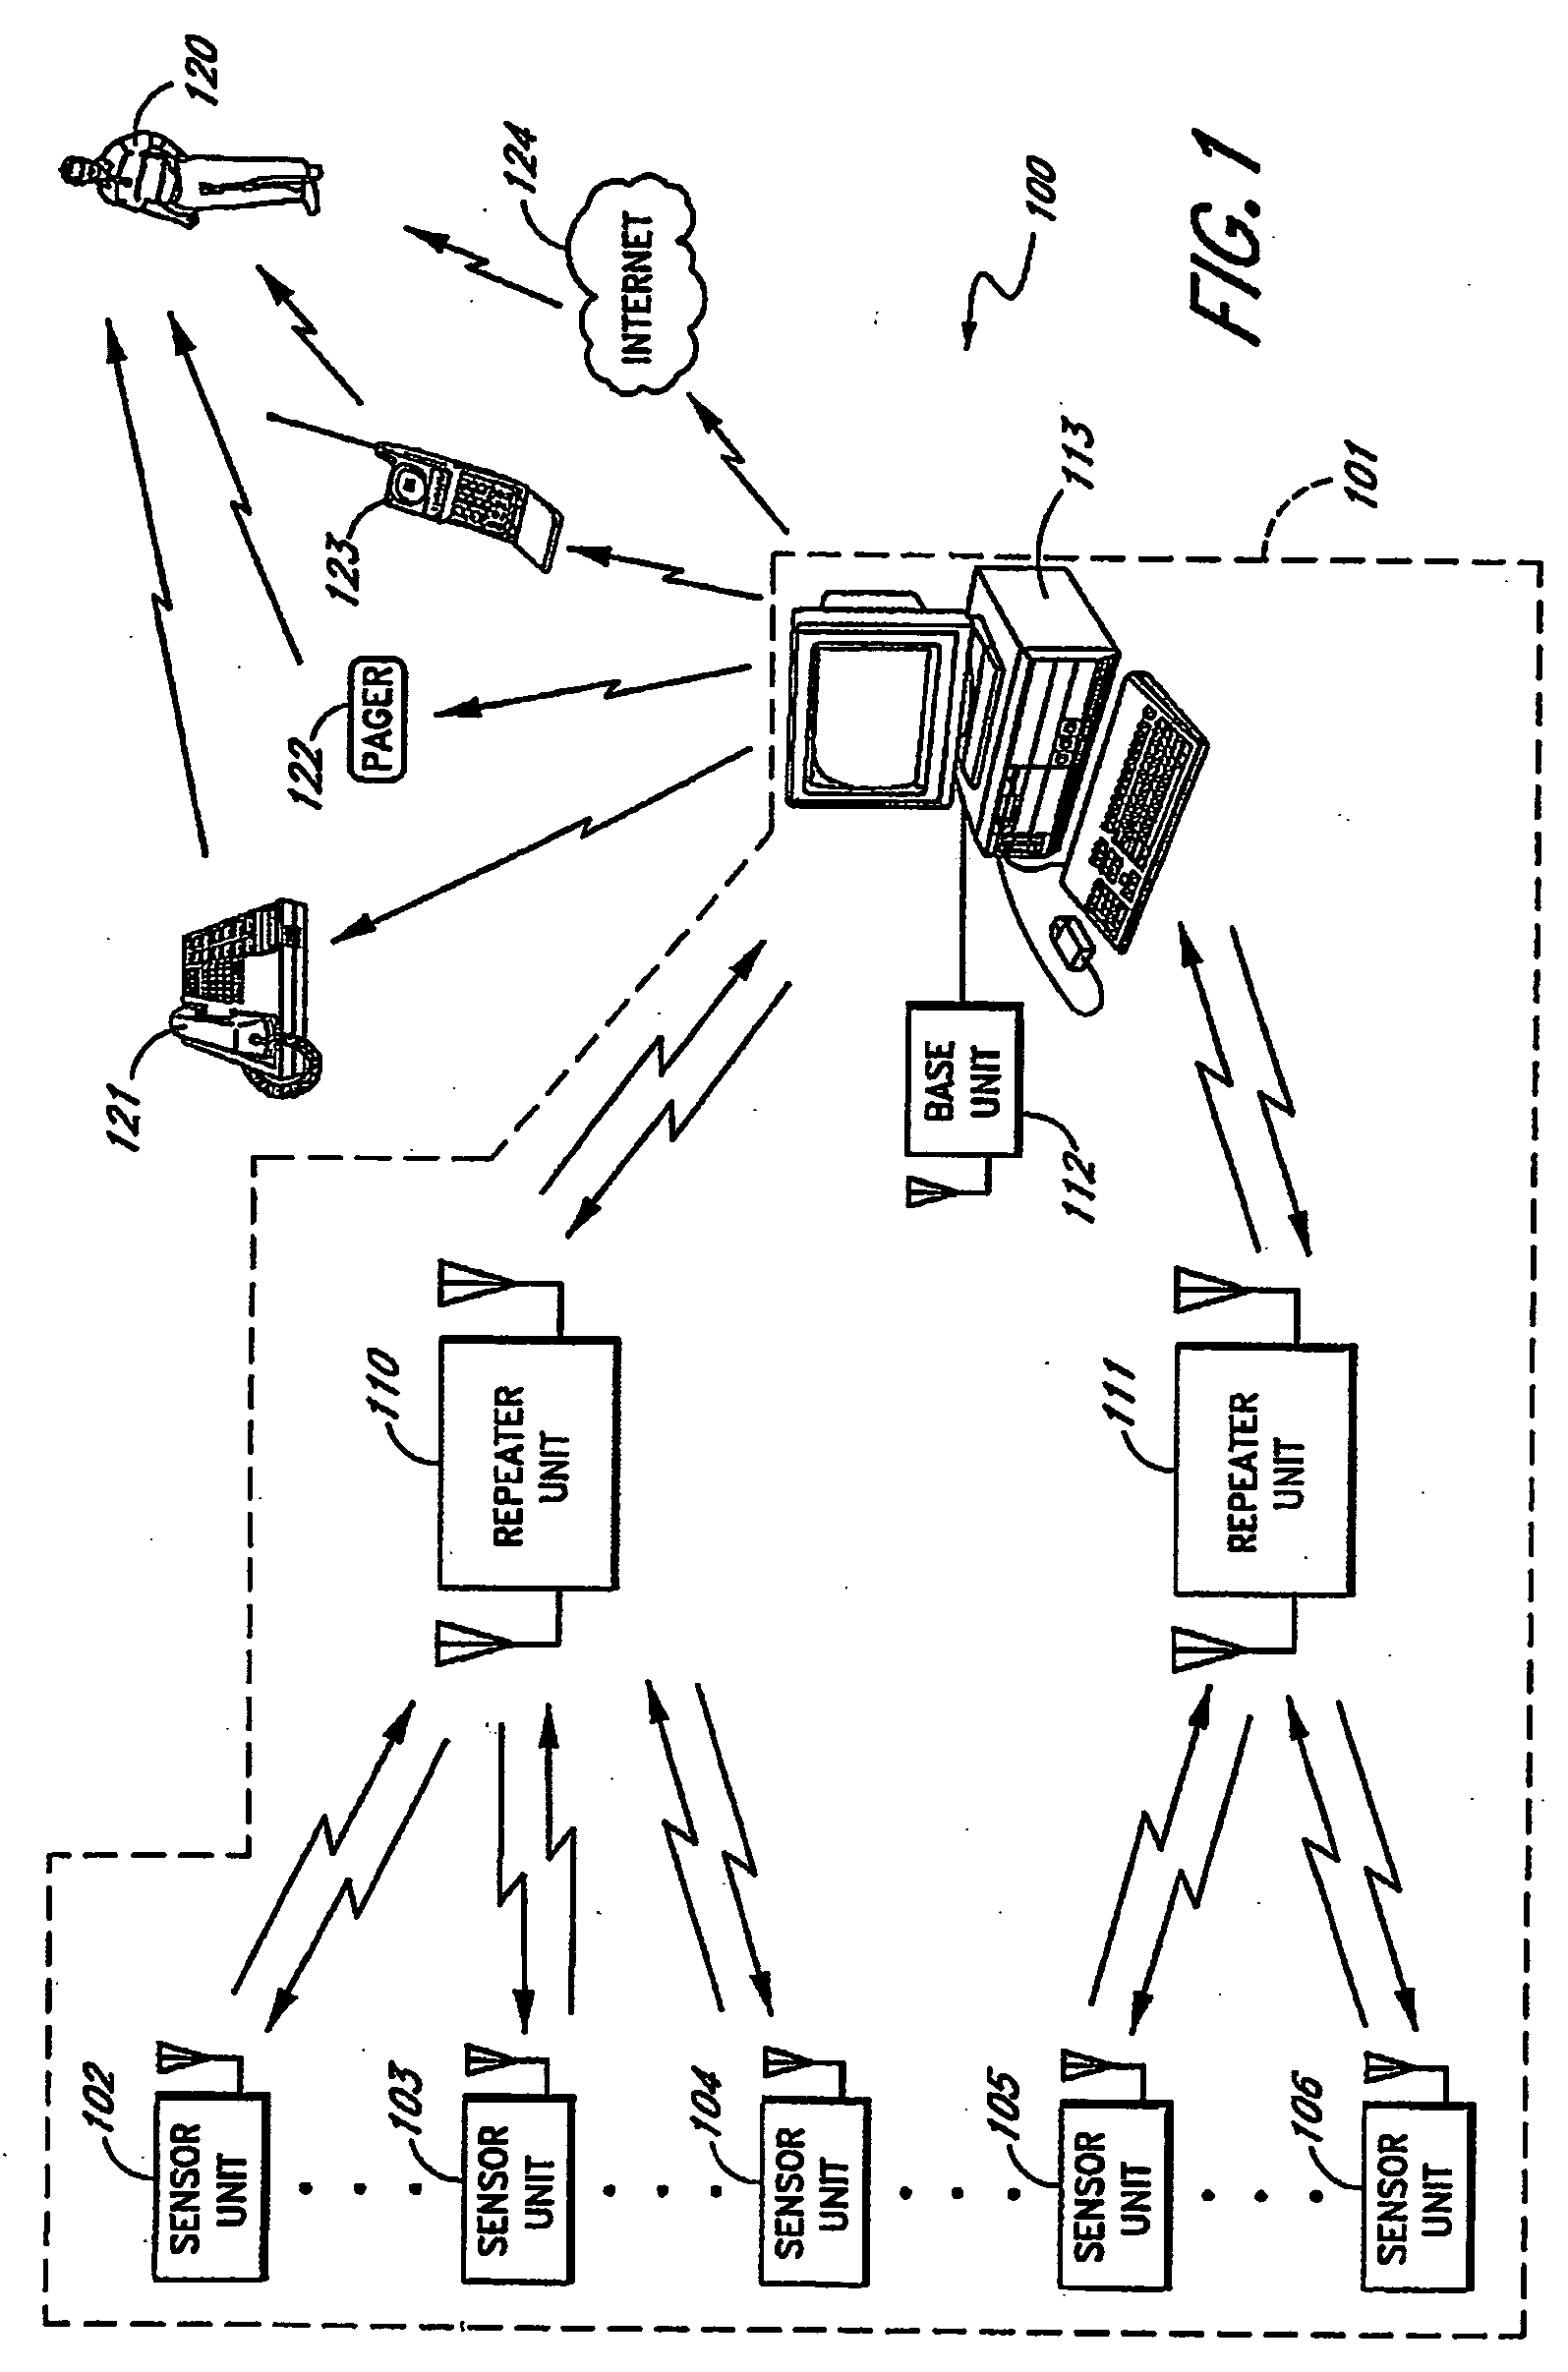 Method and apparatus for detecting conditions favorable for growth of fungus